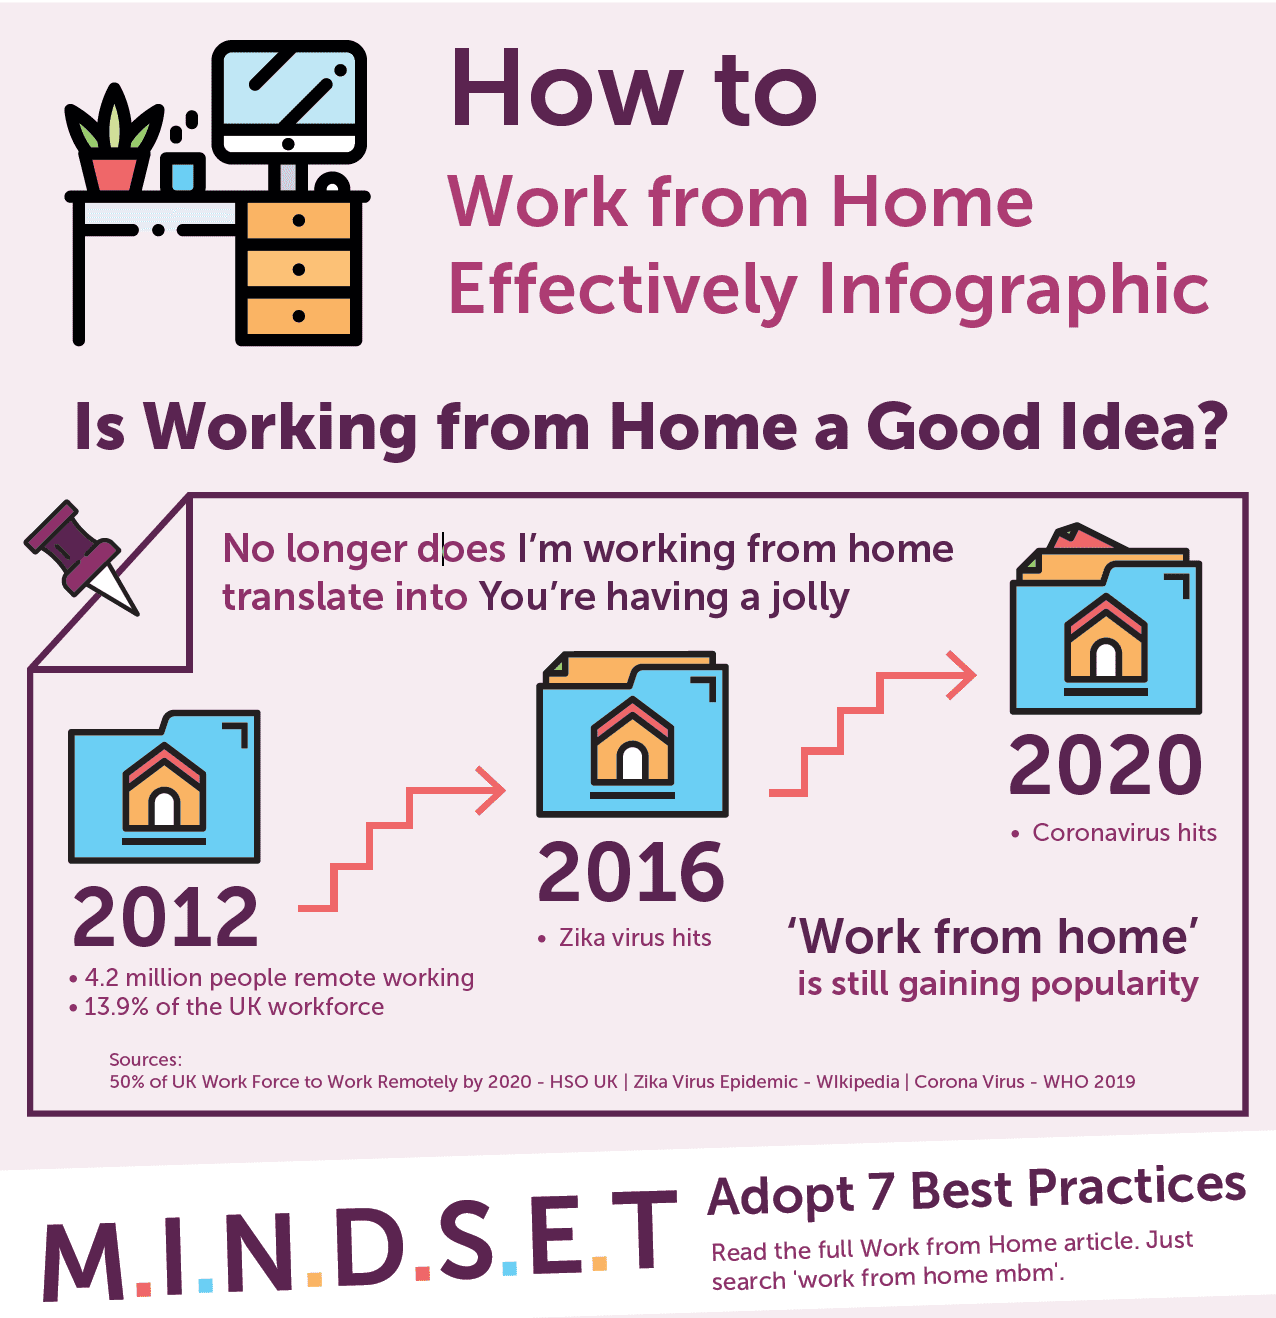 Infographic about Is Working from Home a Good Idea with remote working stats 2012 to 2020